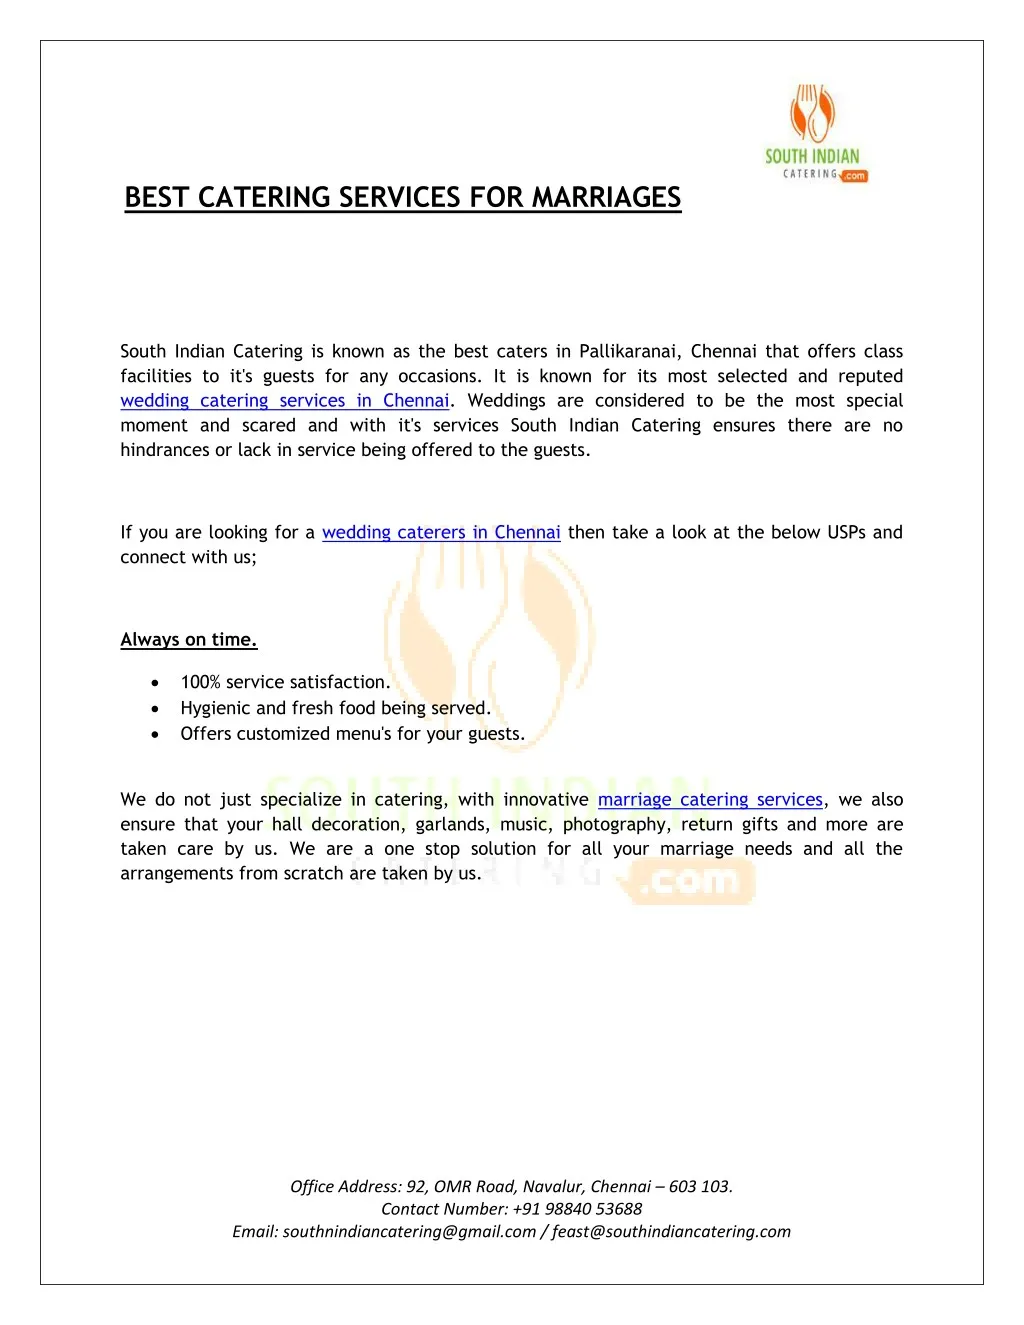 best catering services for marriages